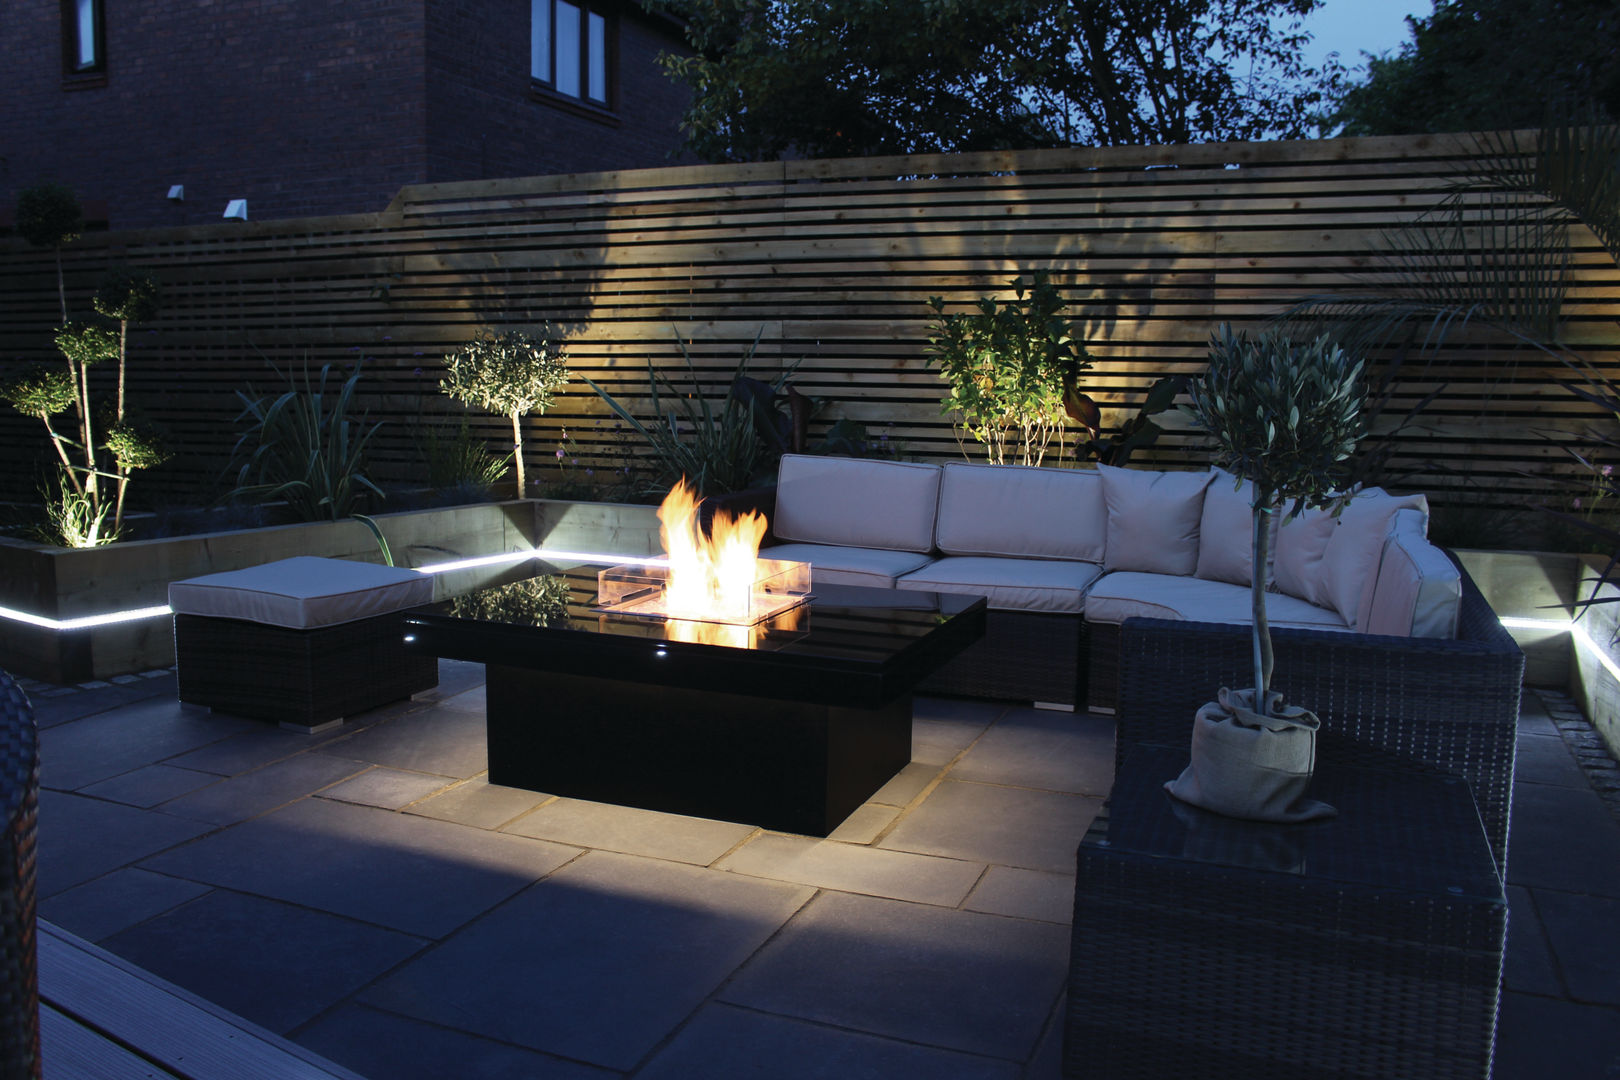 Madrid Gas Fire Table - Warrington Rivelin Garden Fire pits & barbecues